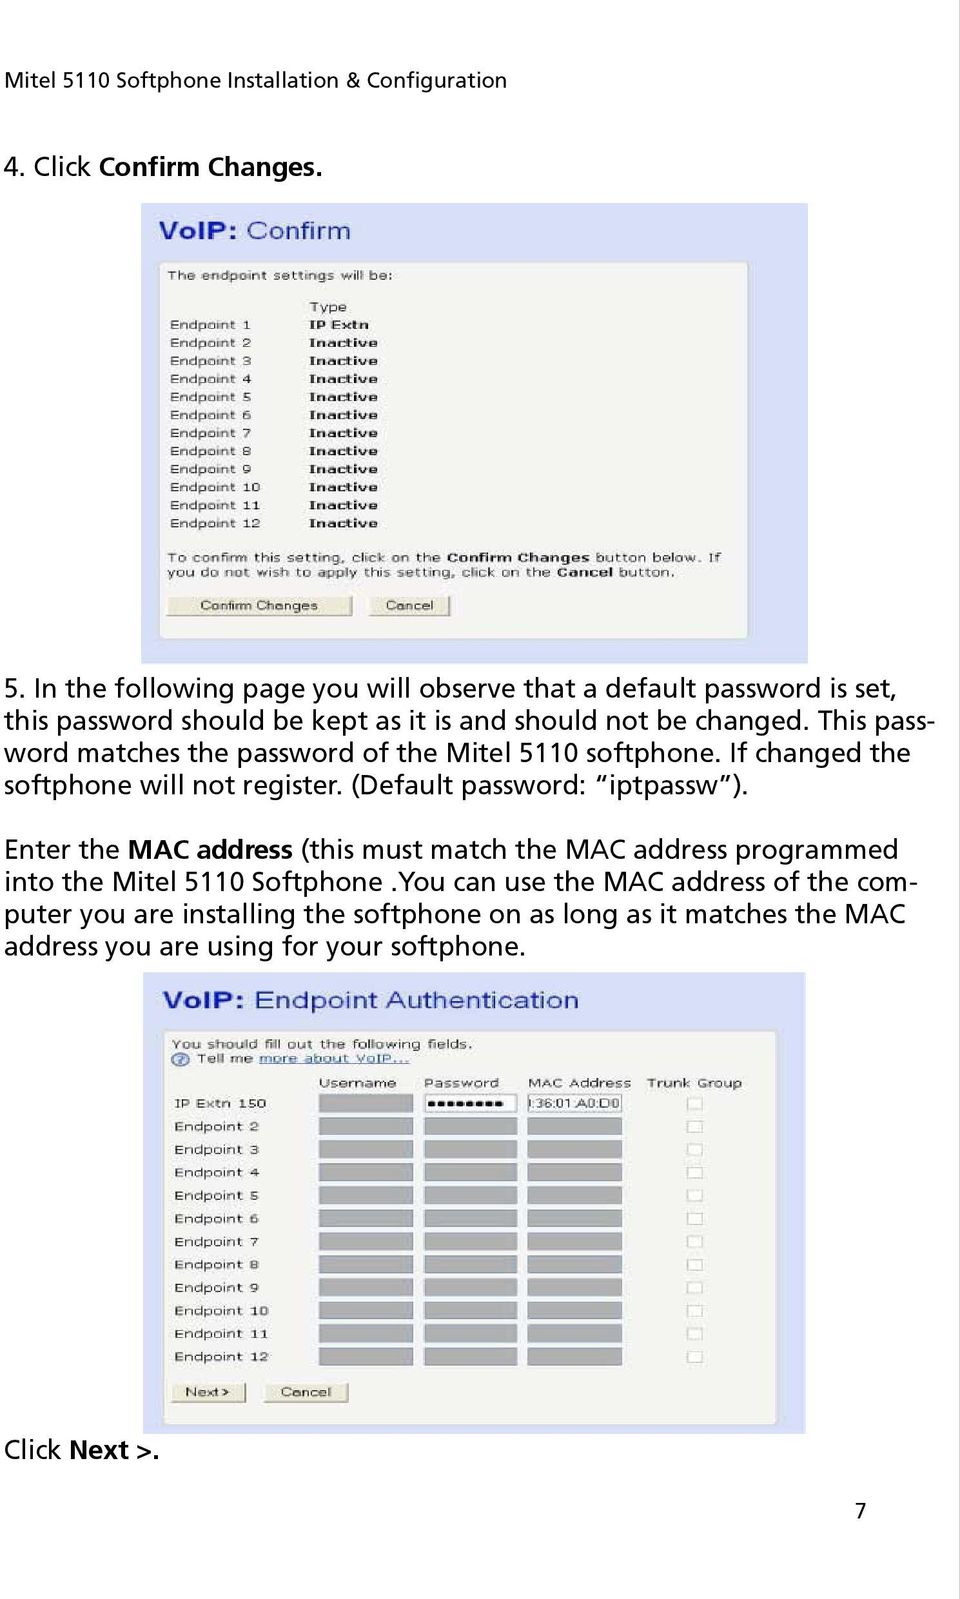 Enter the MAC address (this must match the MAC address programmed into the Mitel 5110 Softphone.